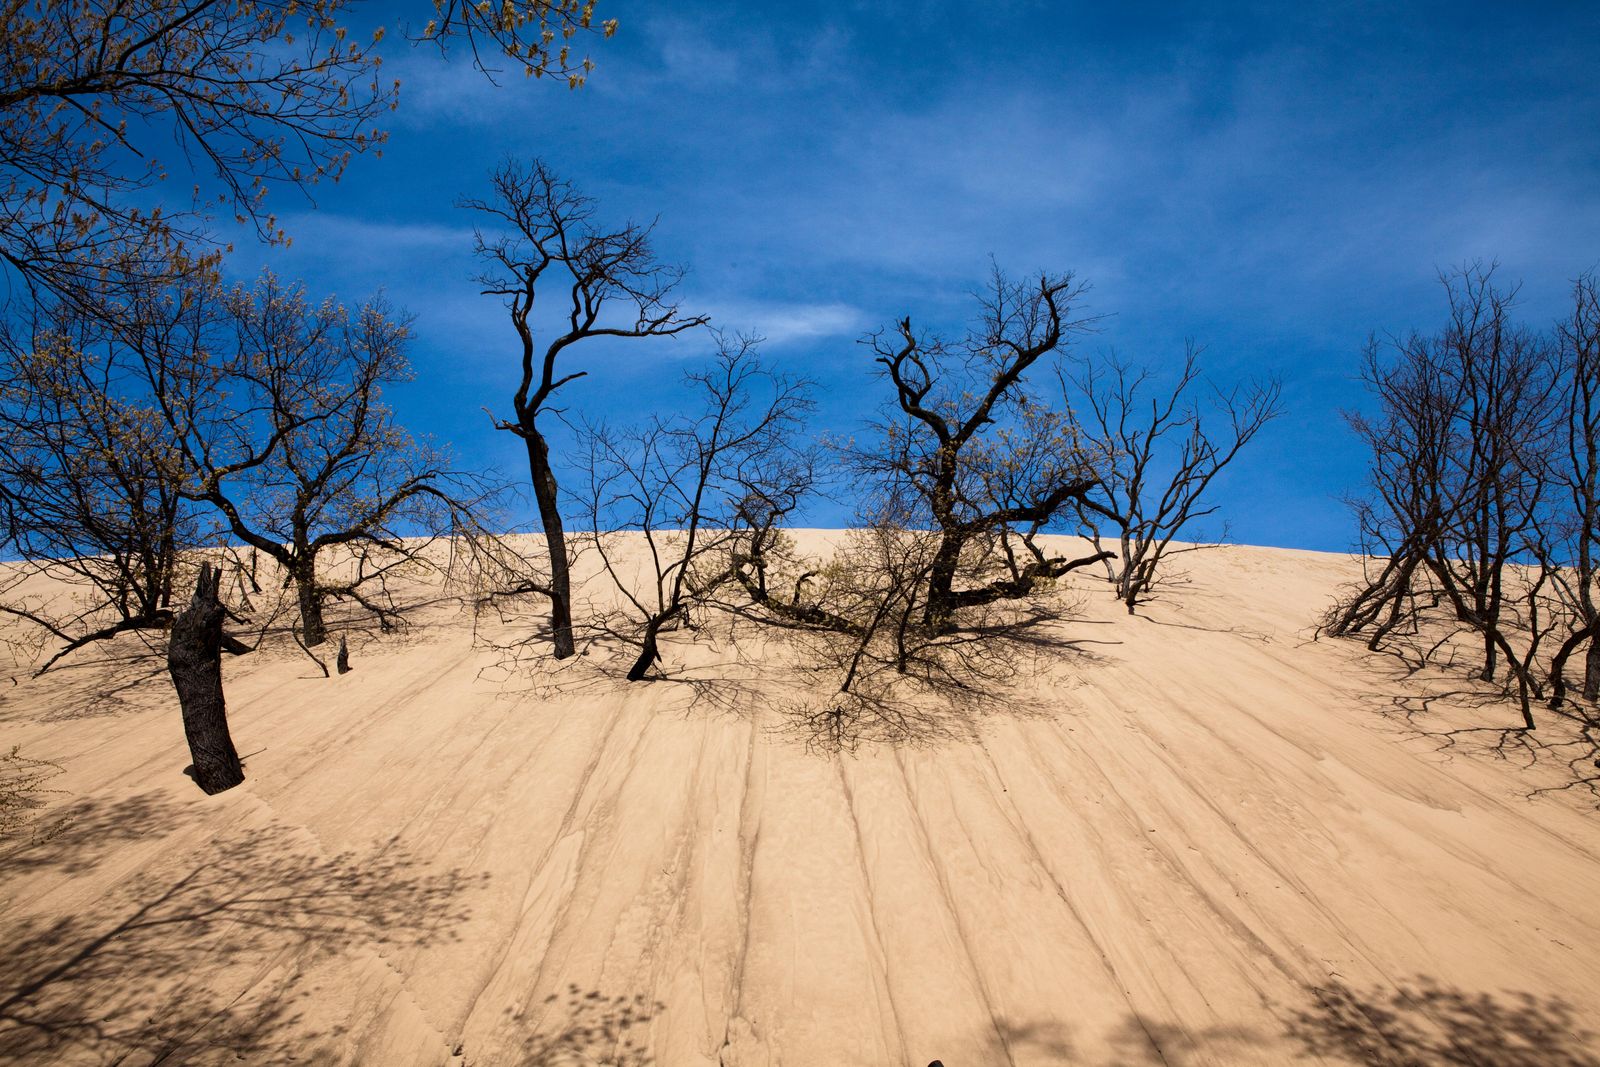 The Mystery of Why This Dangerous Sand Dune Swallowed a Boy, Science